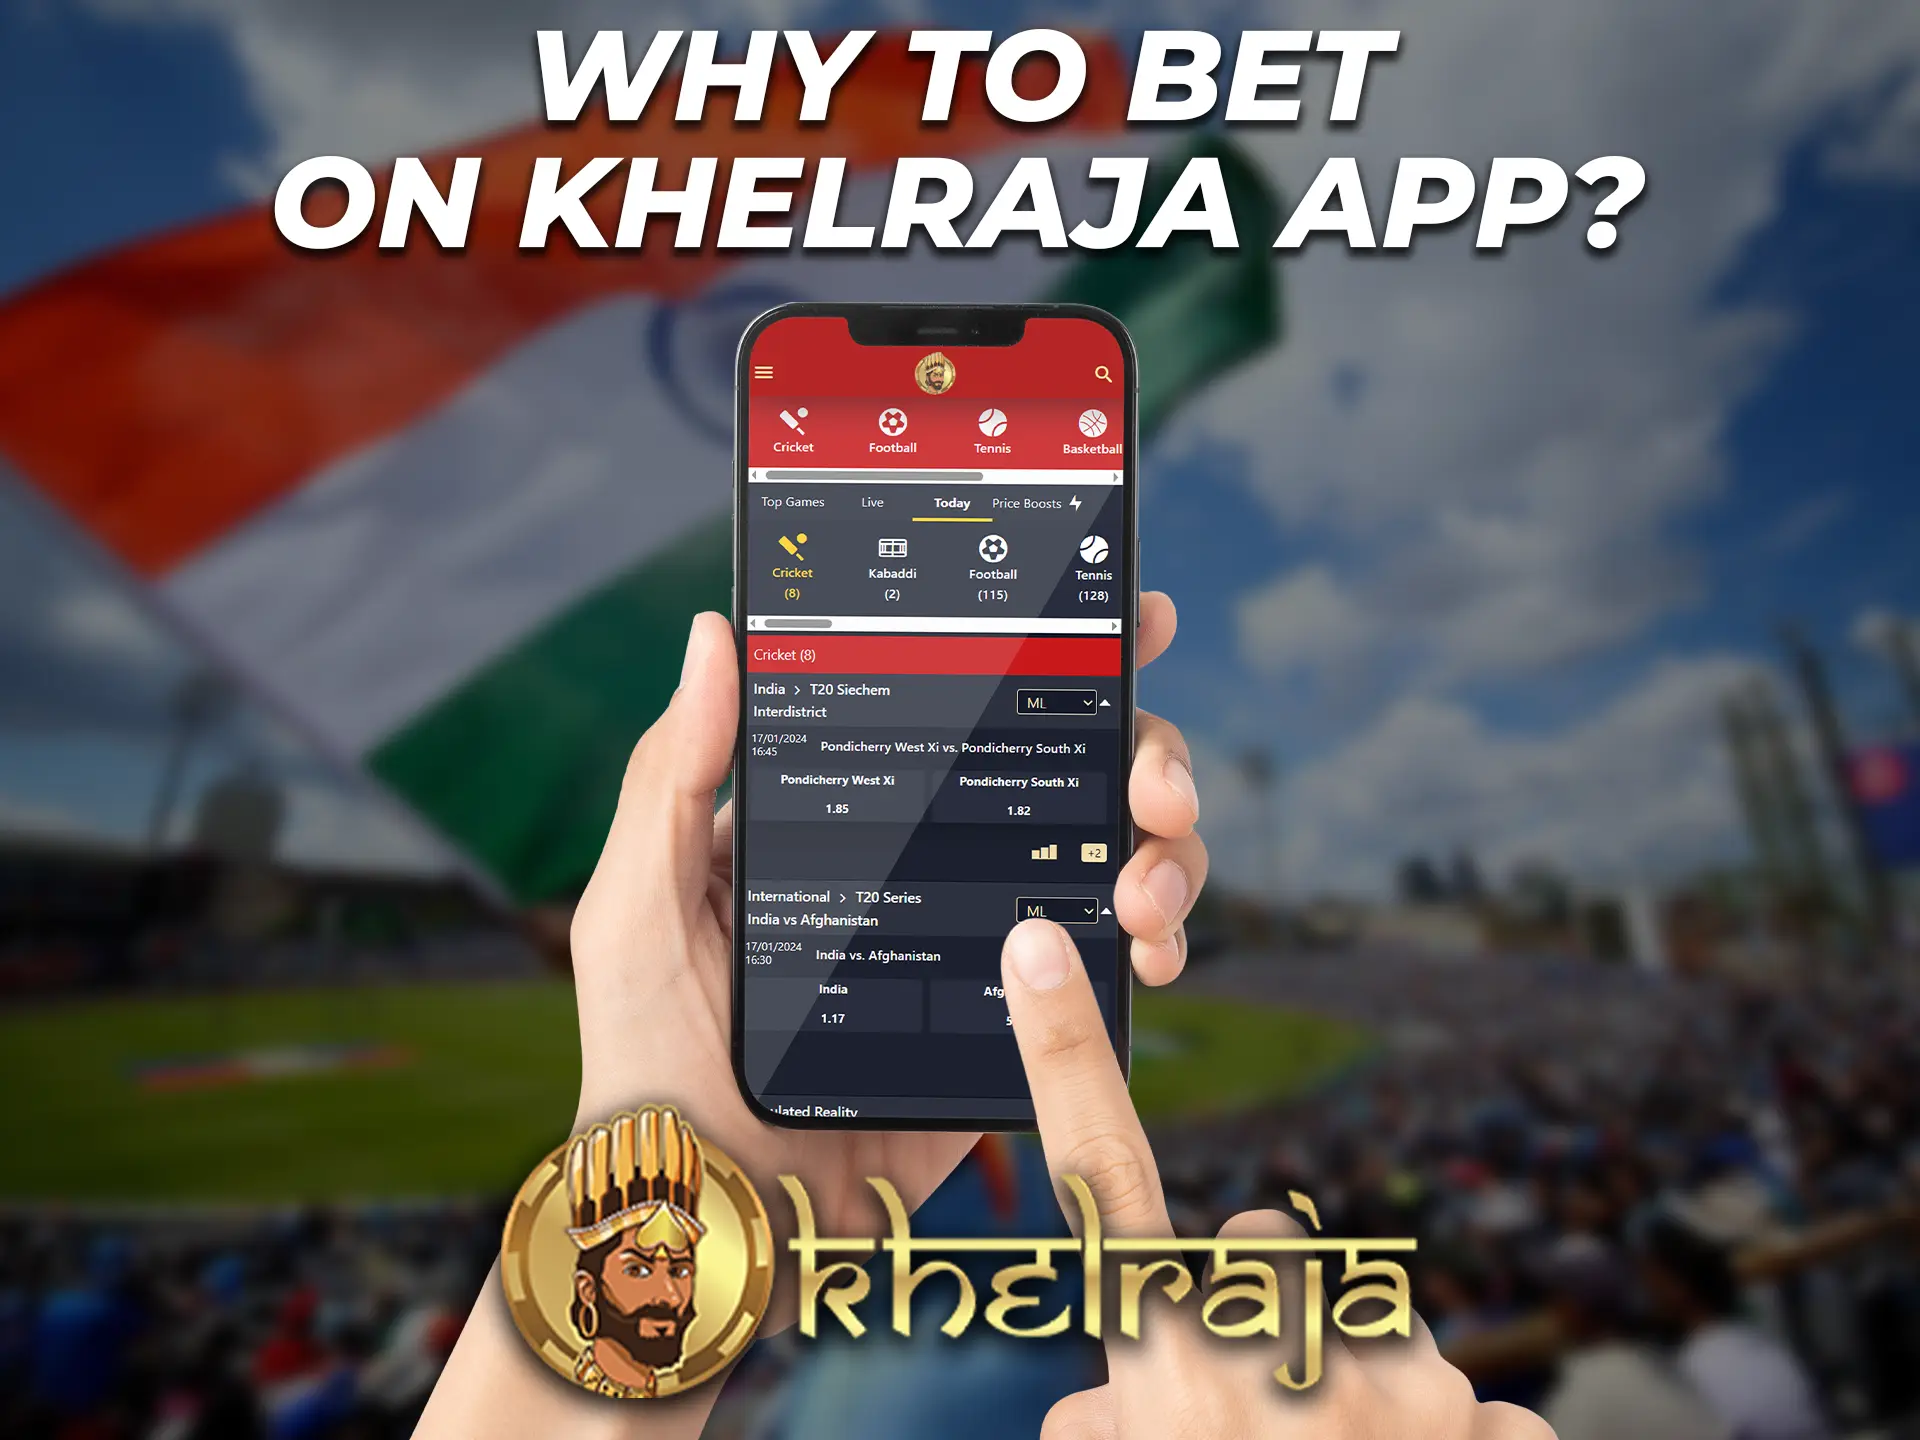 The Khelraja app is one of the best in India and is equipped with a wide range of features.